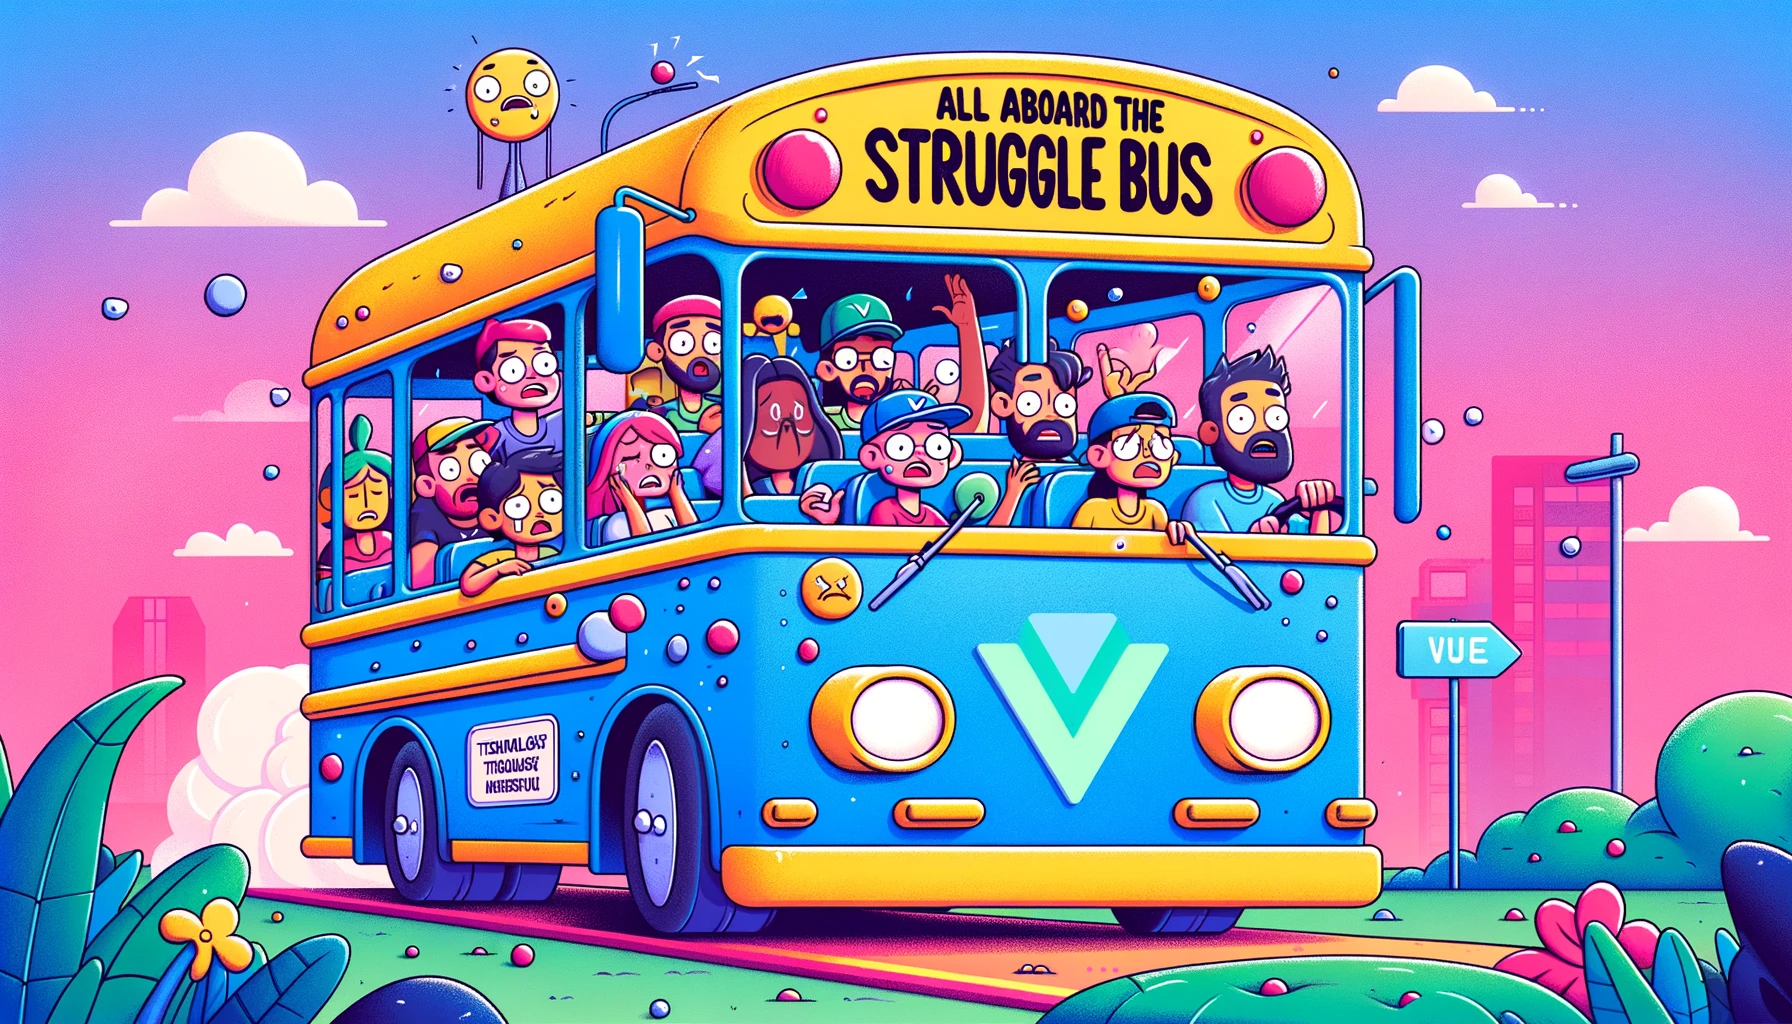 A playful and engaging illustration for a tech blog post titled 'All Aboard the Struggle Bus', featuring a cartoon-style bus in a colorful setting